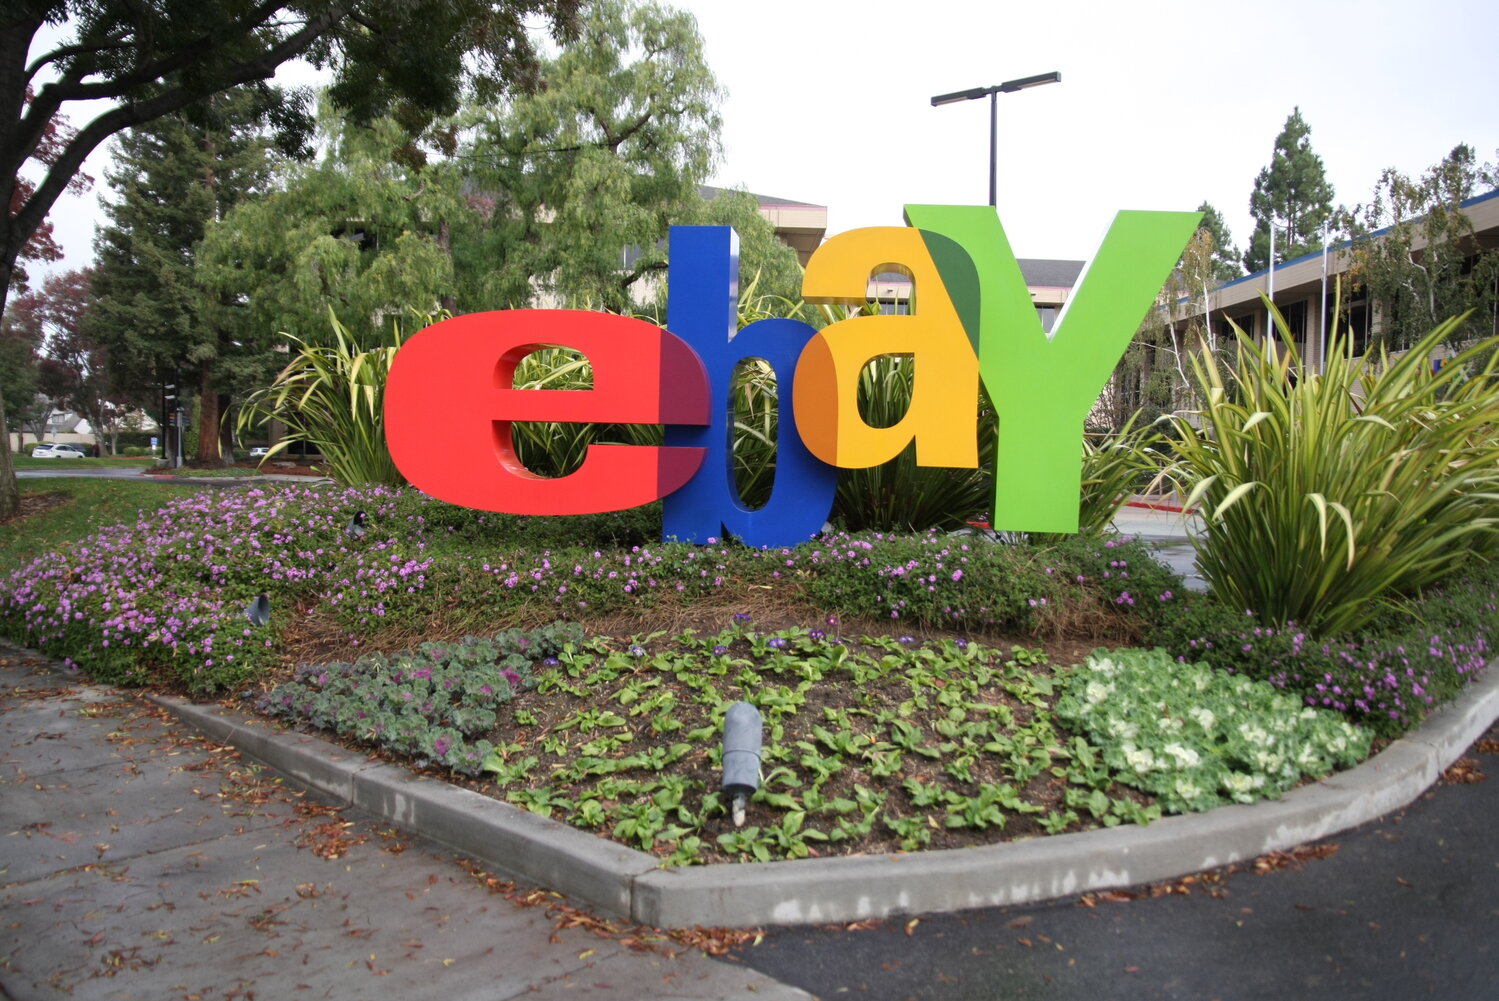 The New York City and New York State comptrollers have written to e-commerce giant eBay asking that company officials reinstate a statement recognizing their employees' explicit rights to unionize.